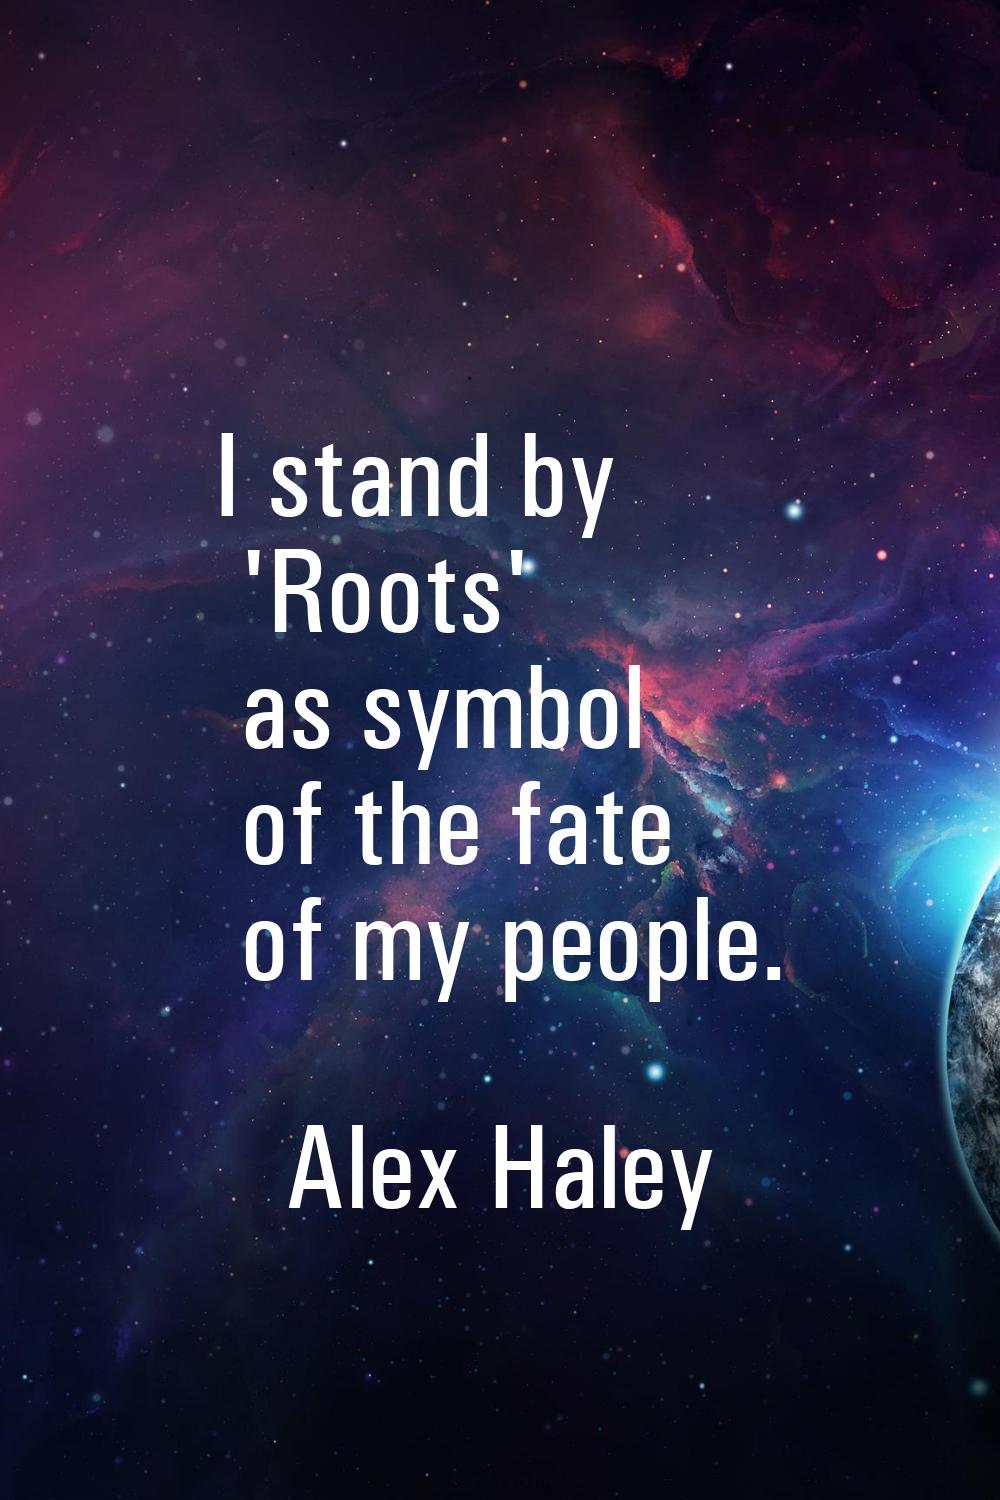 I stand by 'Roots' as symbol of the fate of my people.